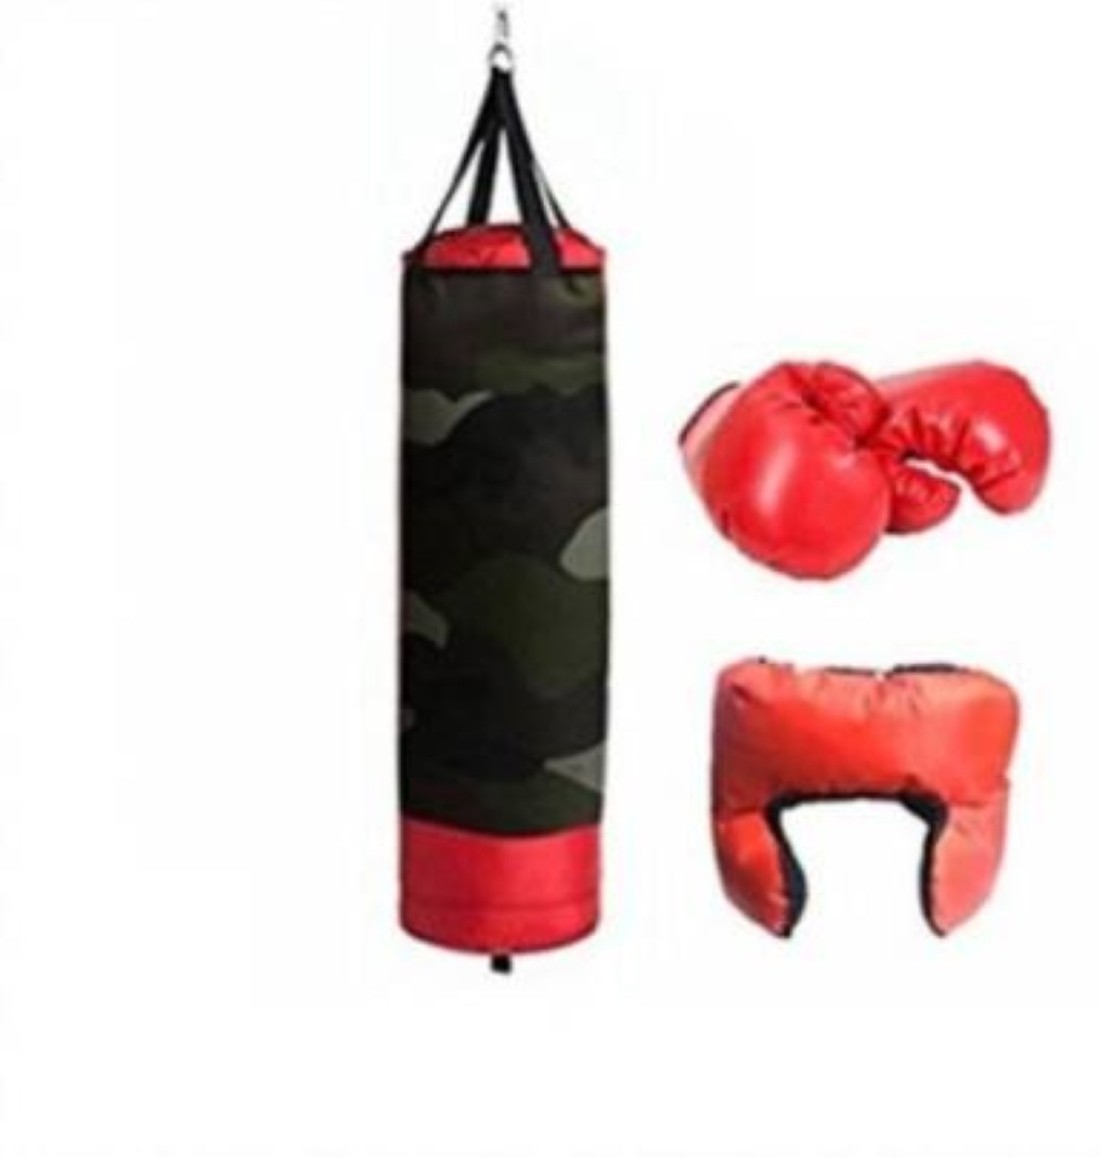 mayank and company Military Green Junior Boxing Set With Punching Bag, Gloves and Headgear Boxing kit for kids 3 to 9 Years बॉक्सिंग किट